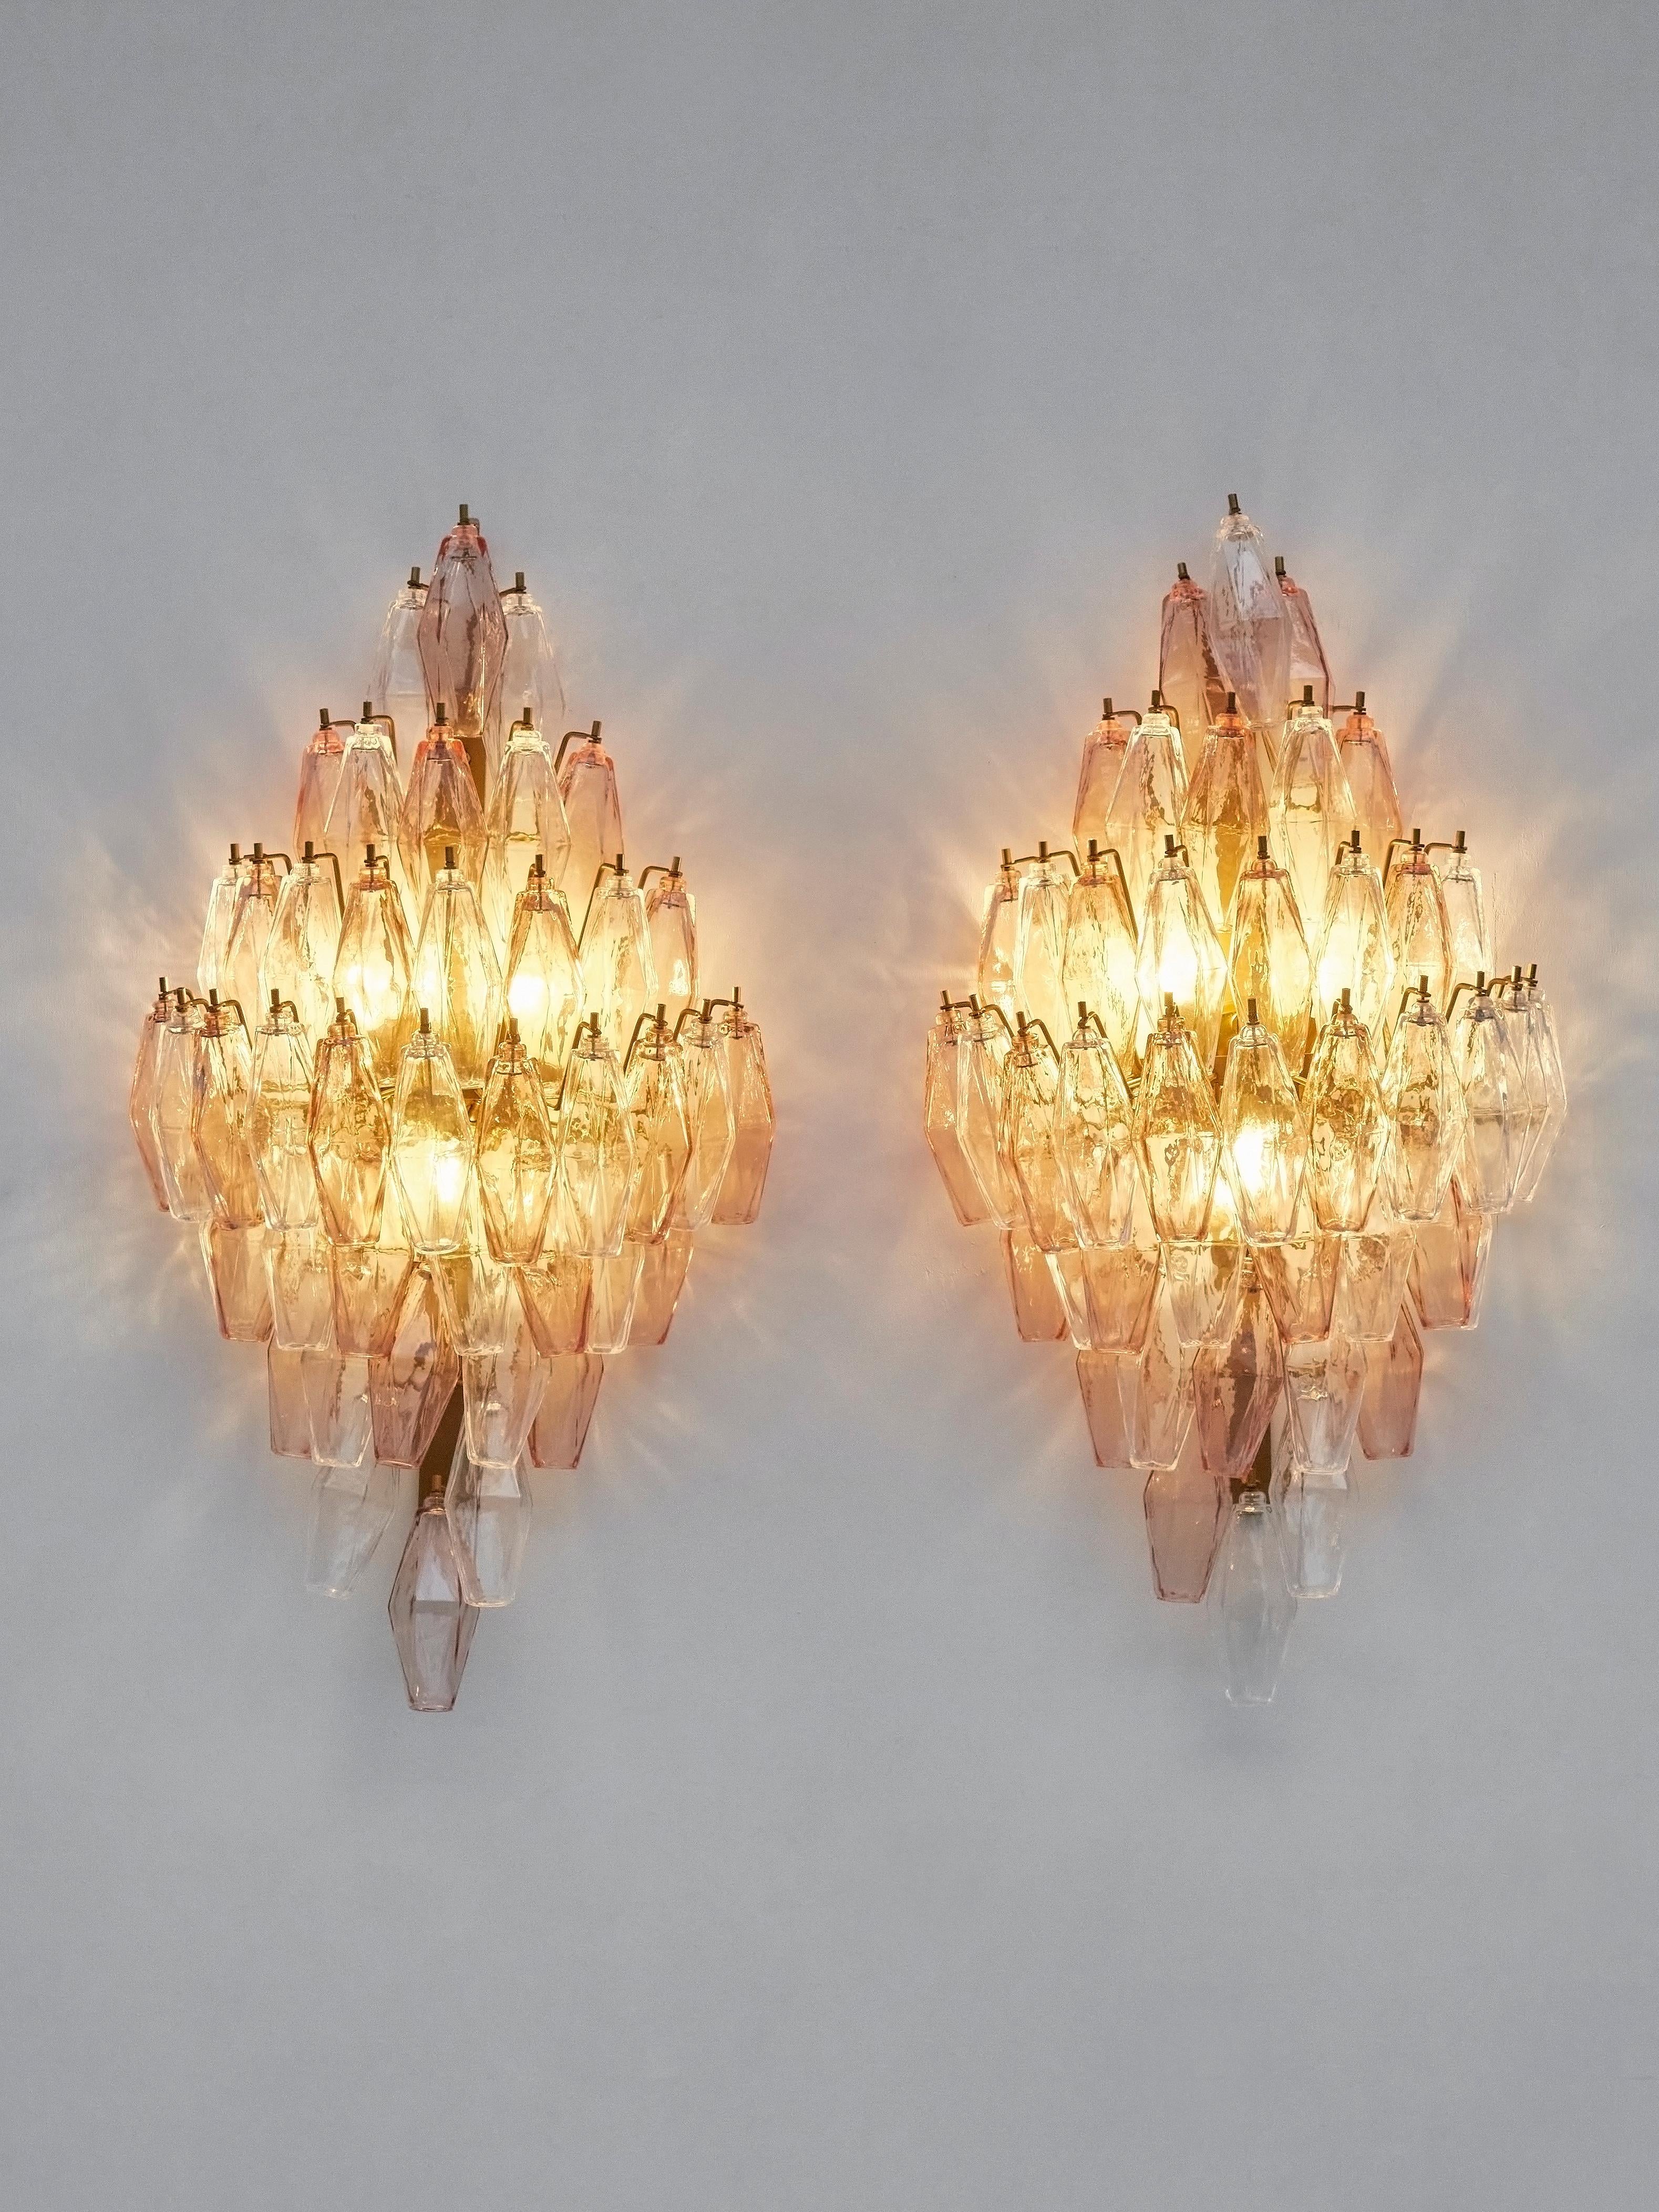 Superb pair of wall sconces with Polyedri glasses in murano.
Creation by Studio Glustin.